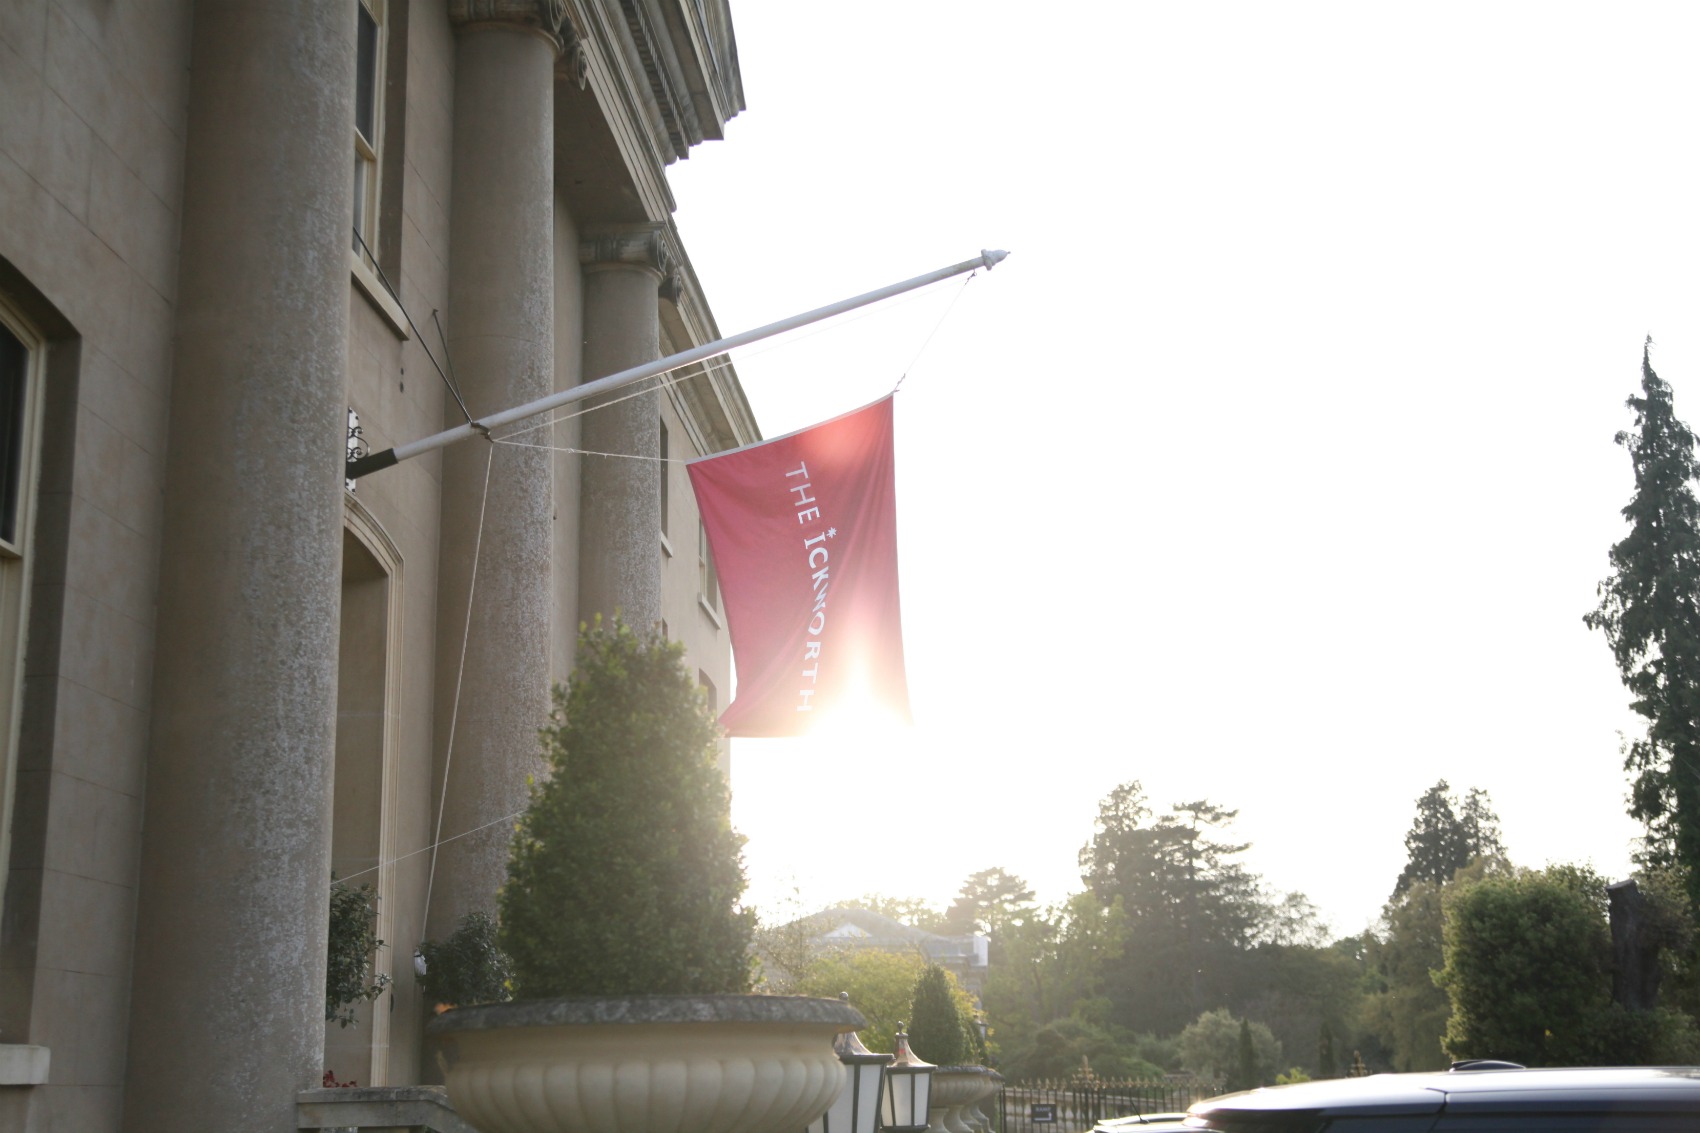 The entrance to the Ickworth Hotel